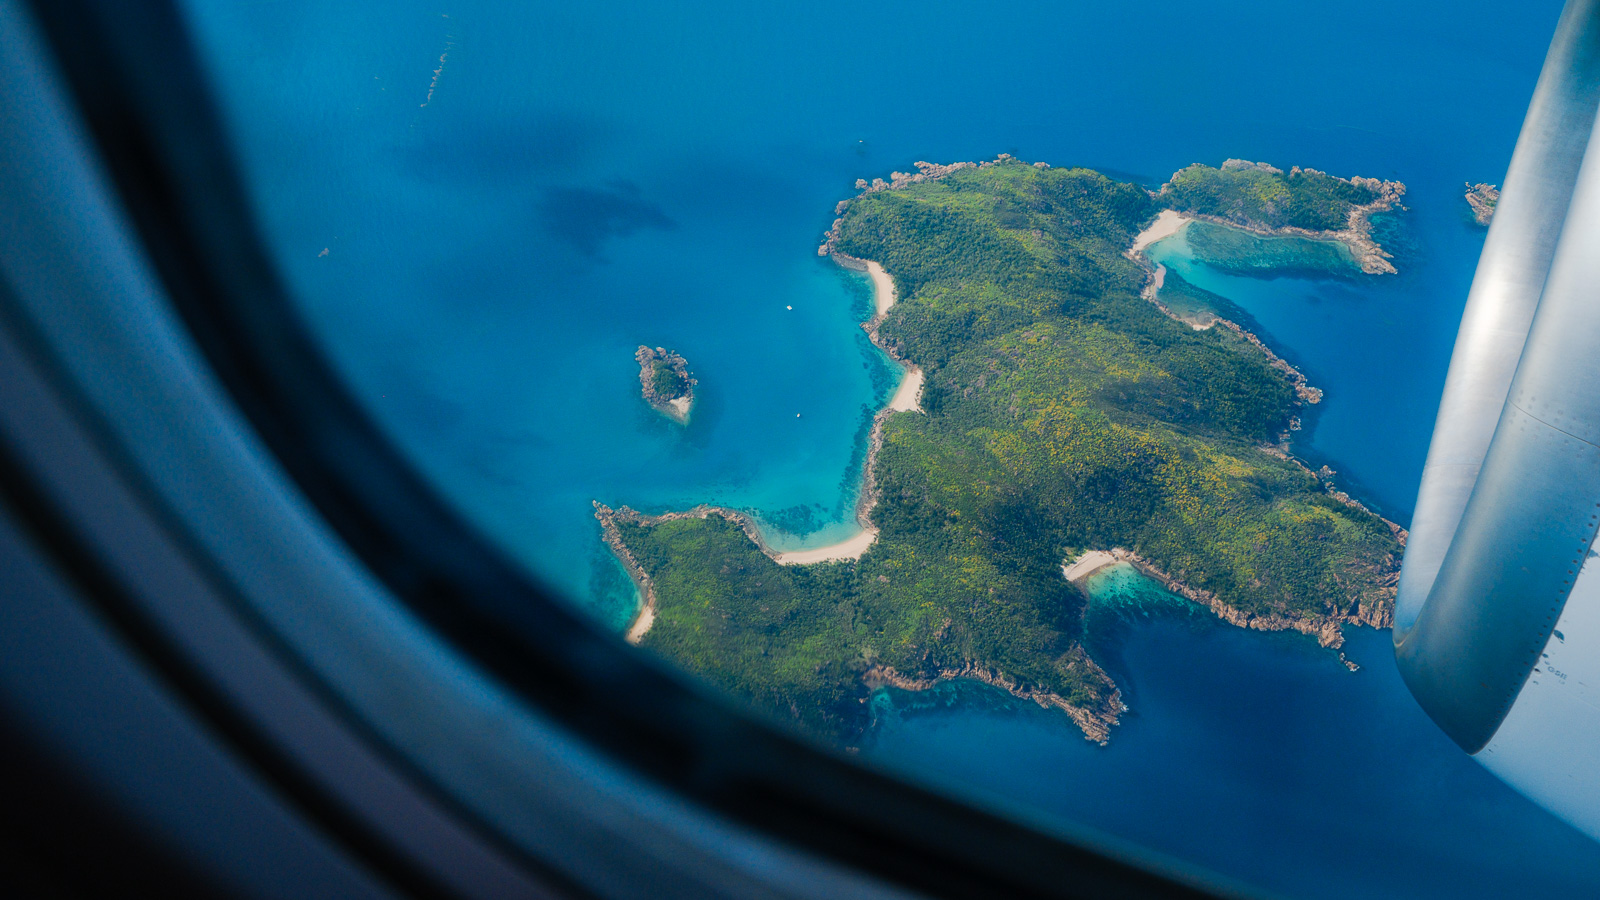 Hamilton Island view from above